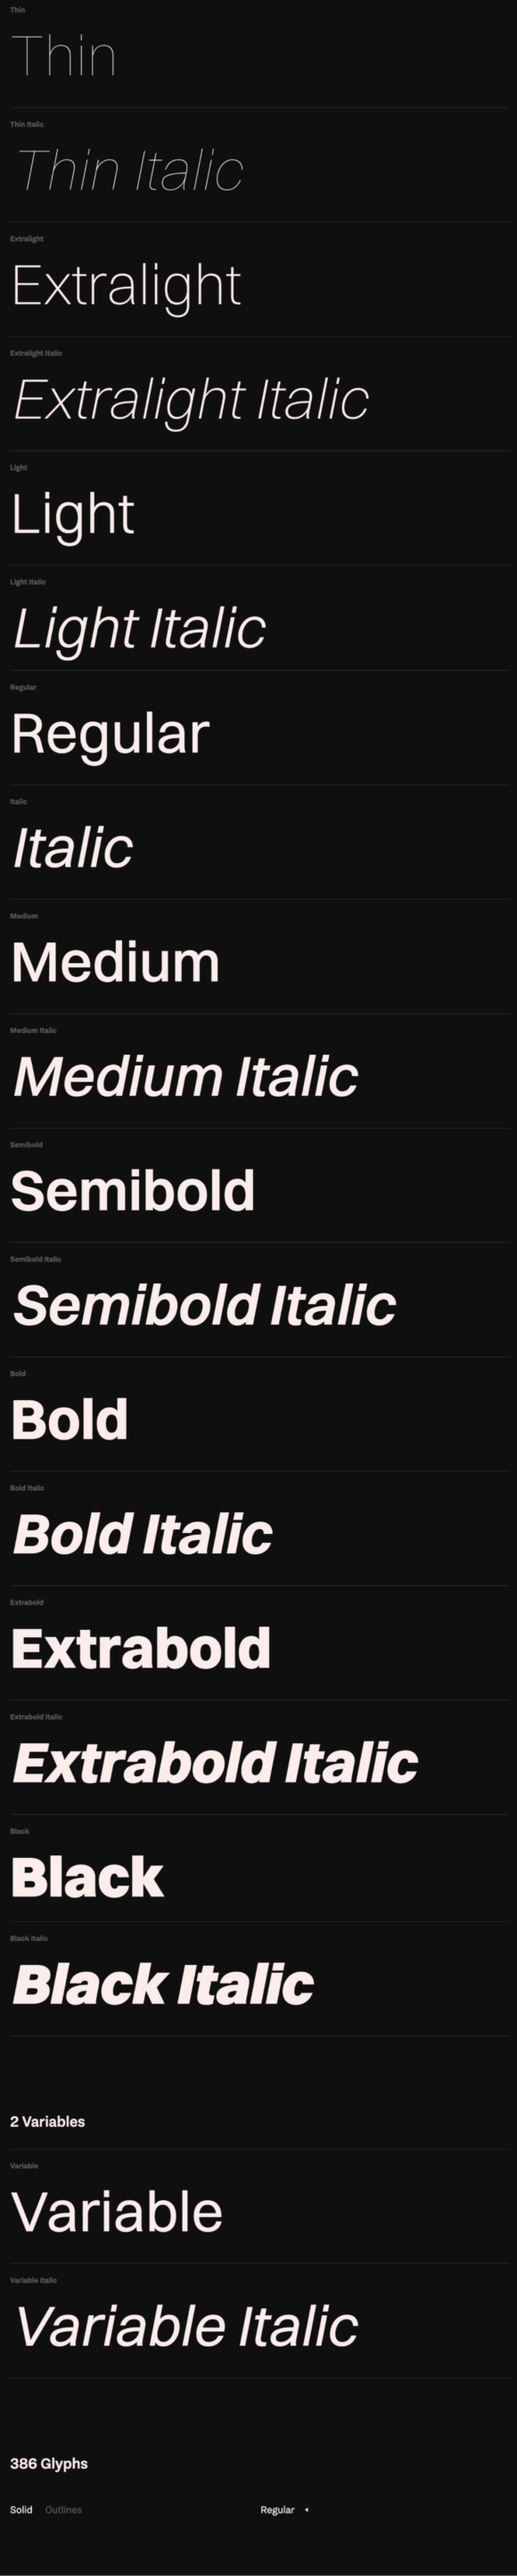 All font styles